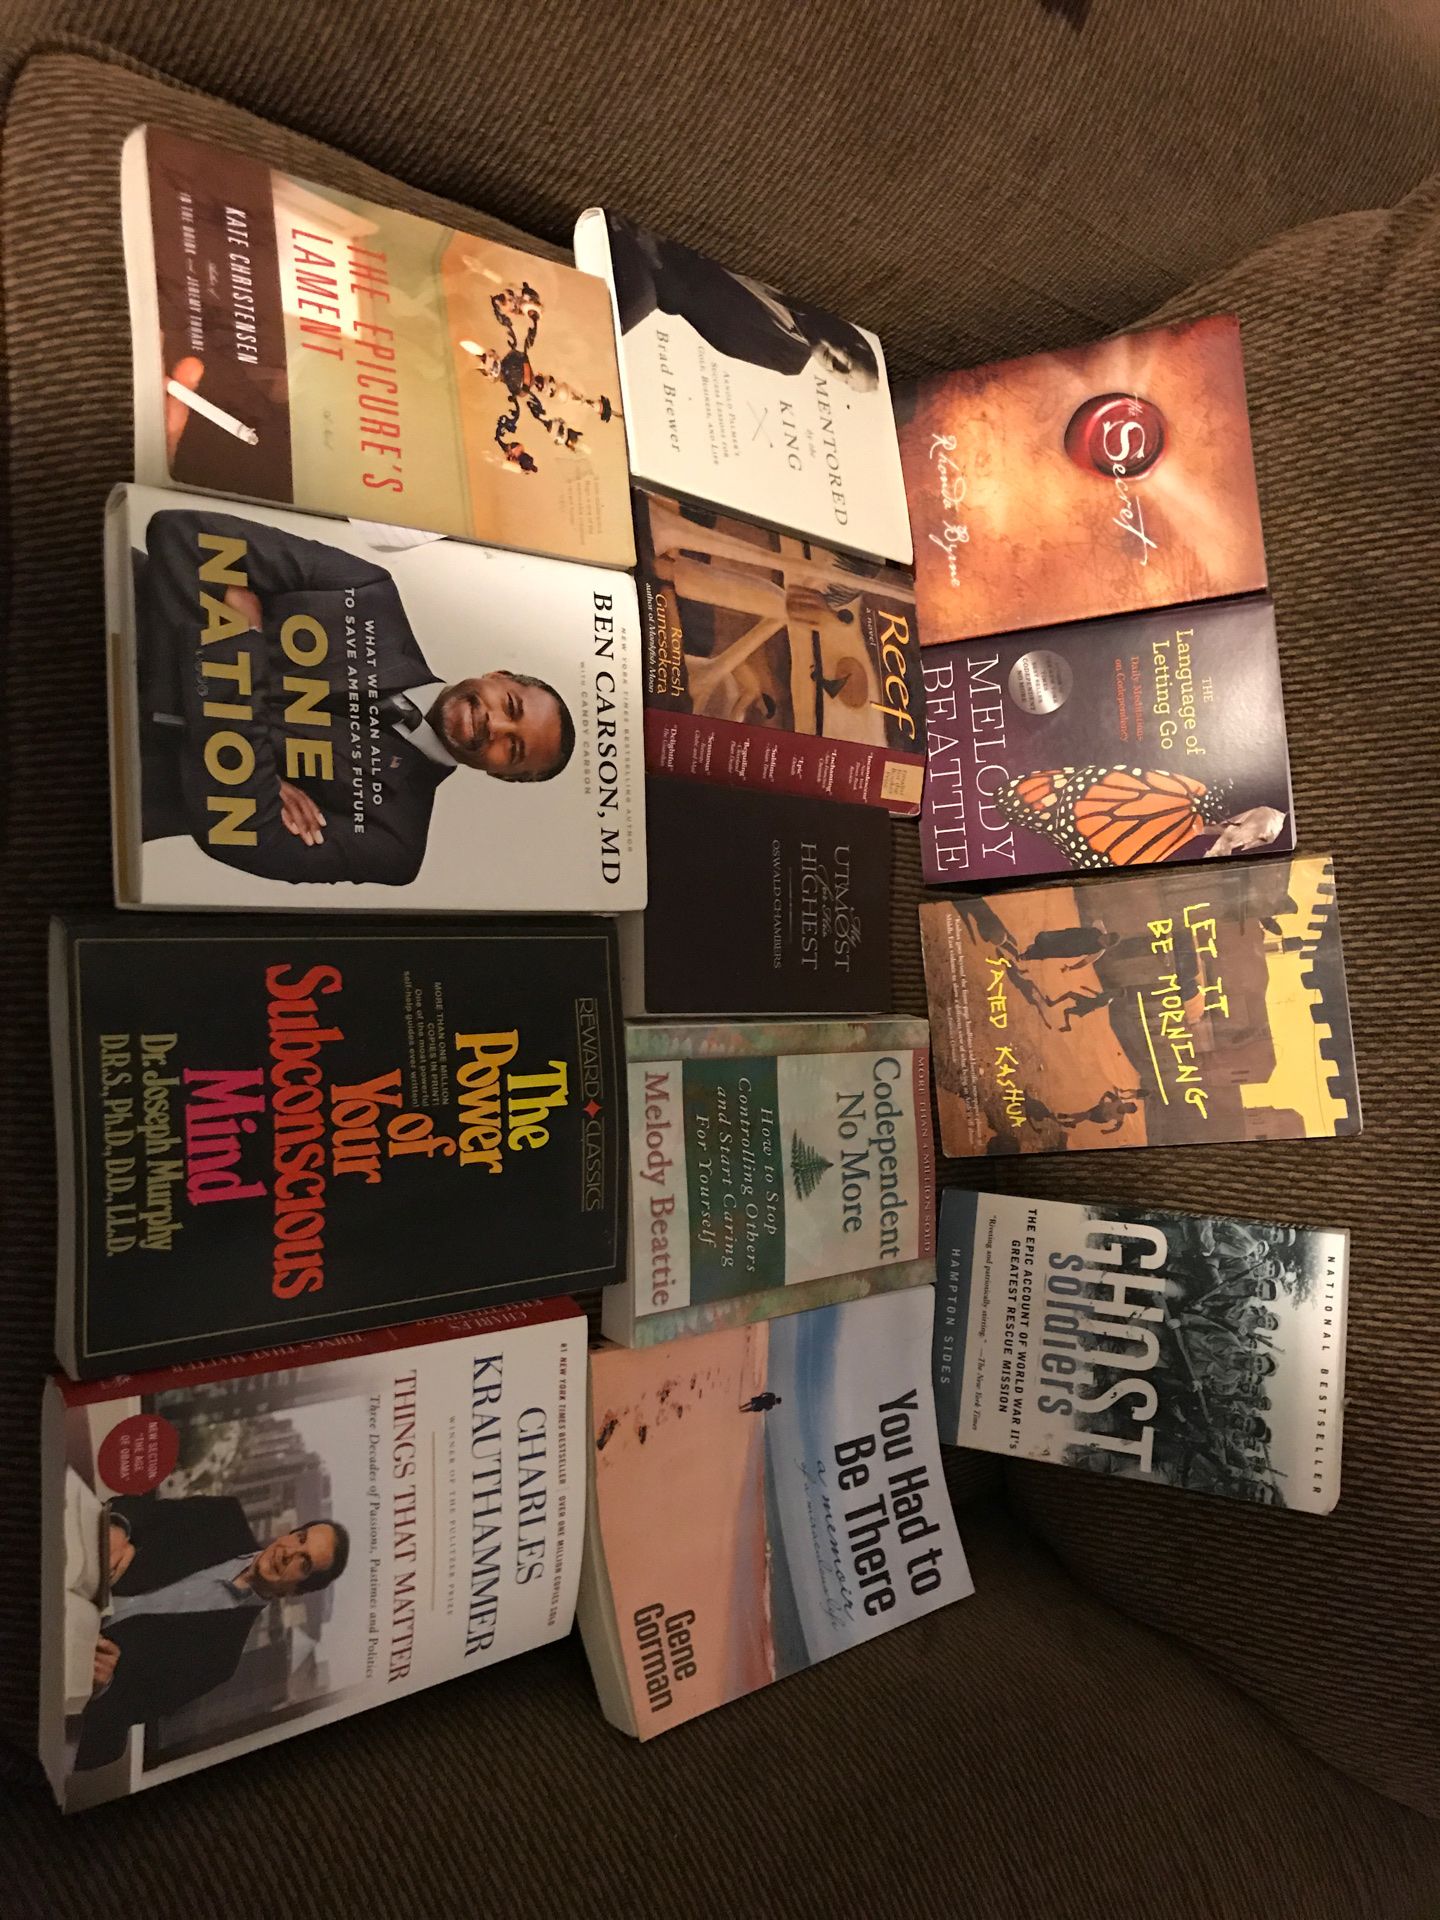 Used Books $30 for all of them - 13 in total